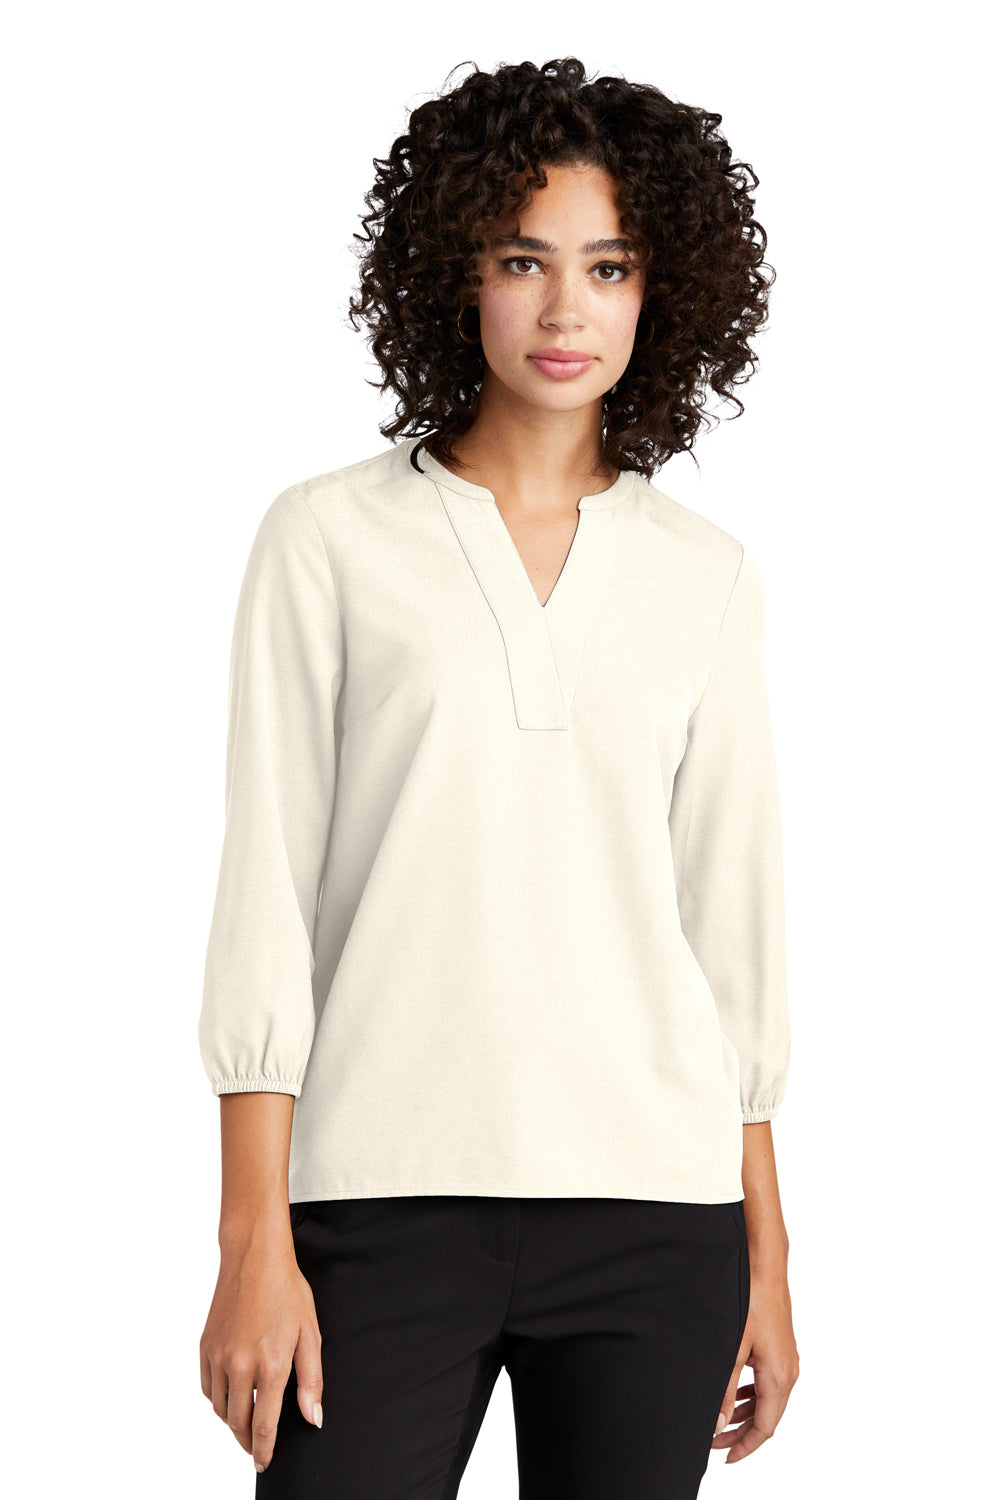 Mercer+Mettle MM2011 Stretch Crepe 3/4 Sleeve Polo Shirt Ivory Chiffon White Front